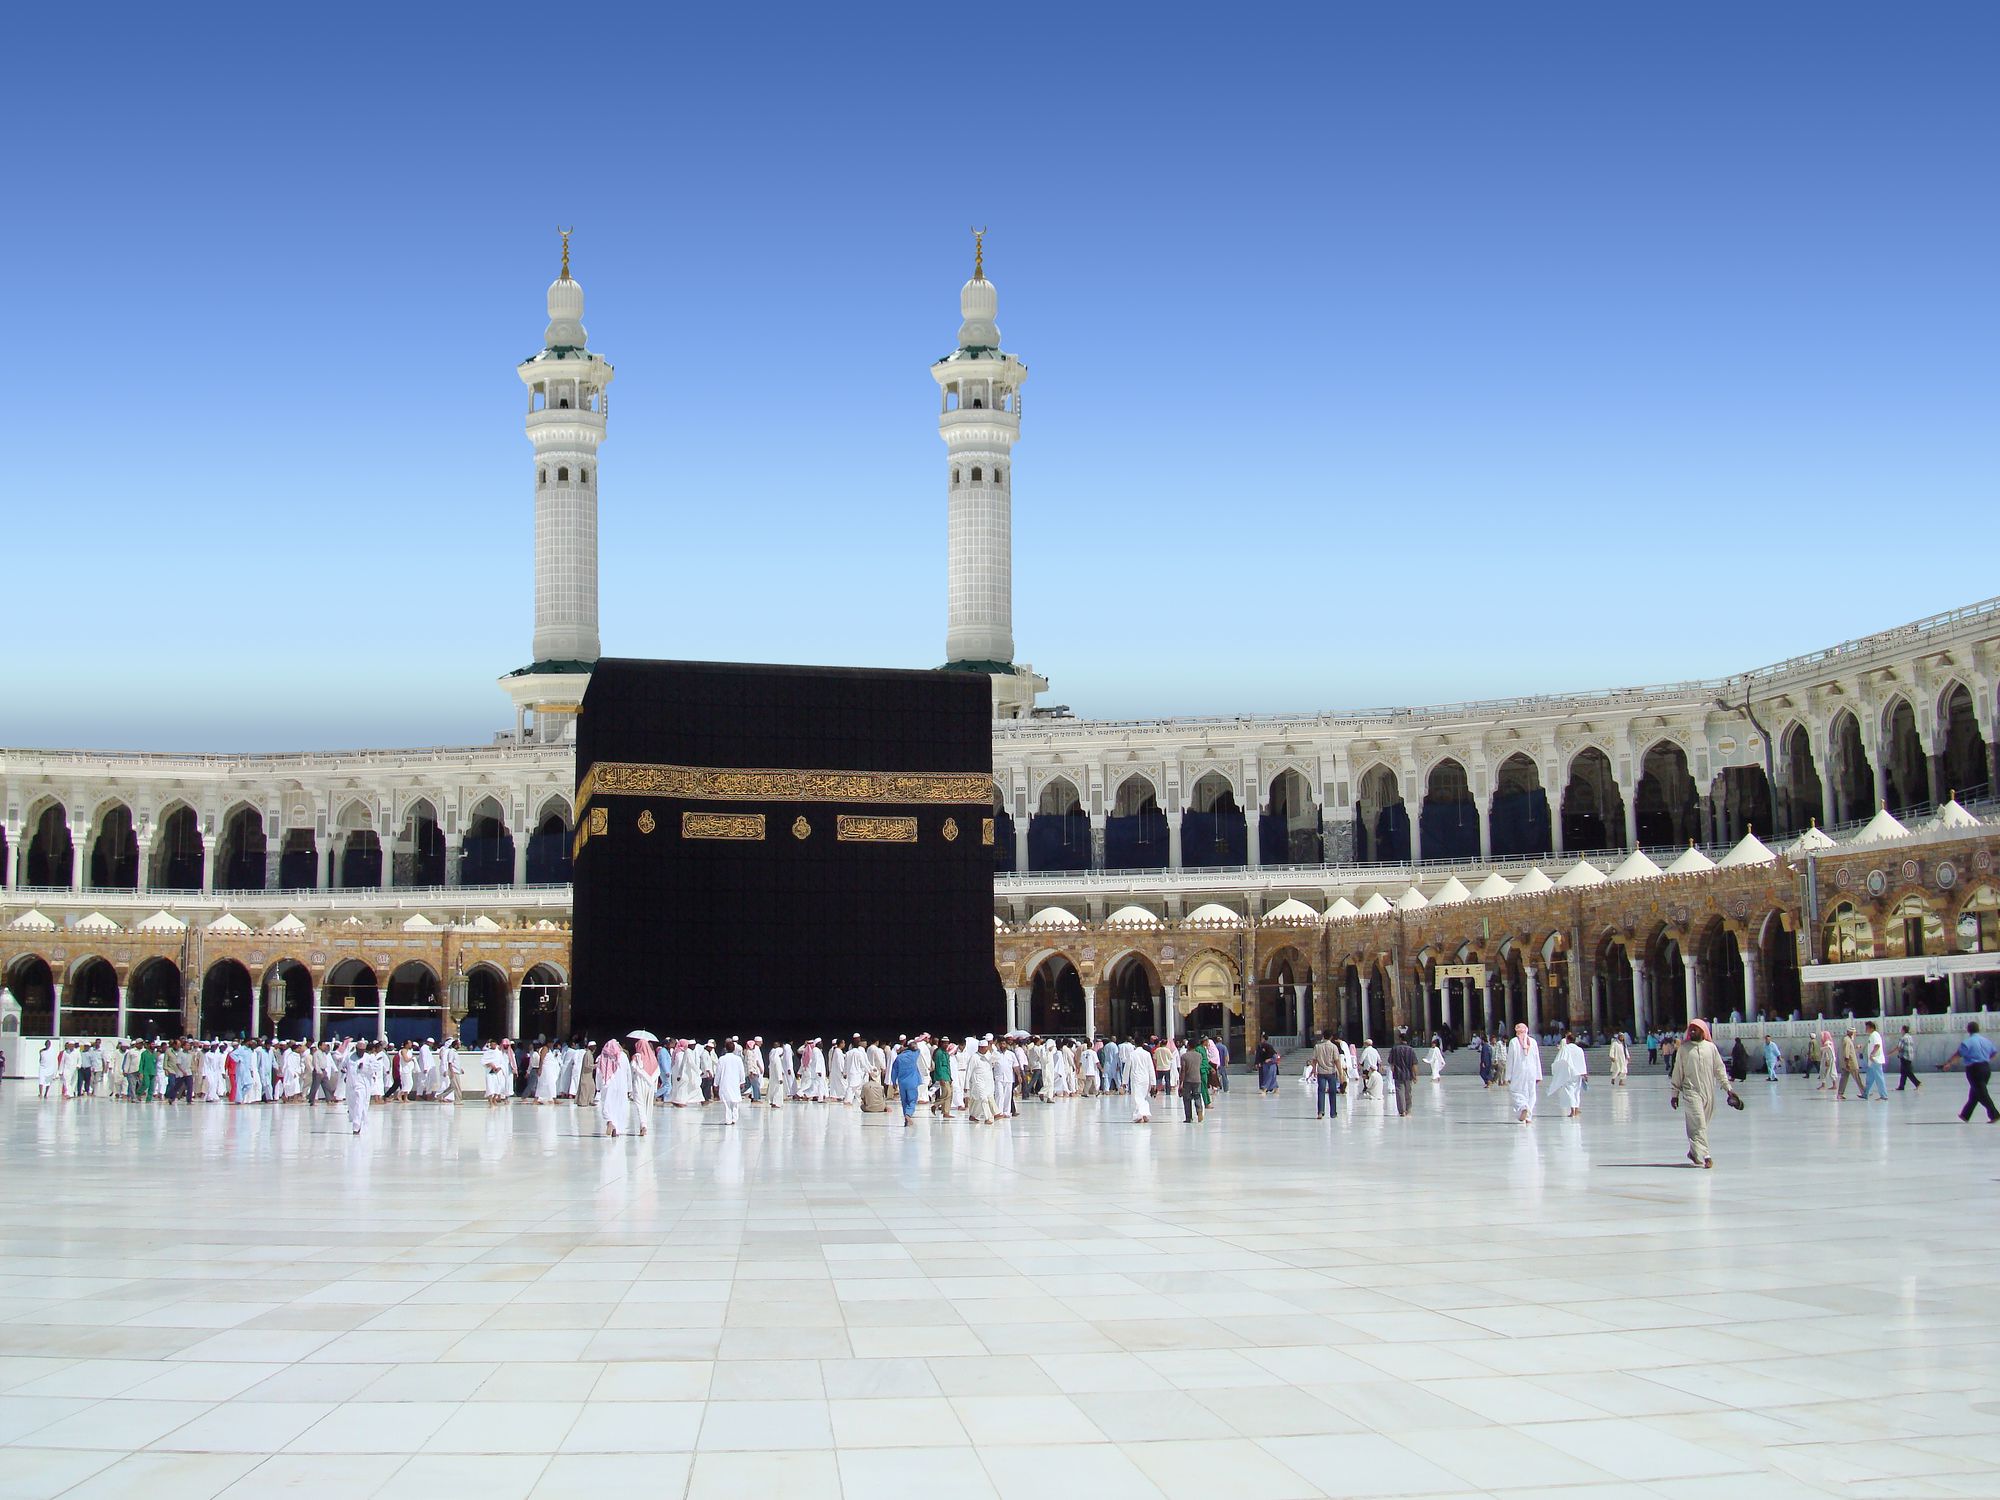 3 weeks after the Hajj season is the best time for Umrah to avoid crowds